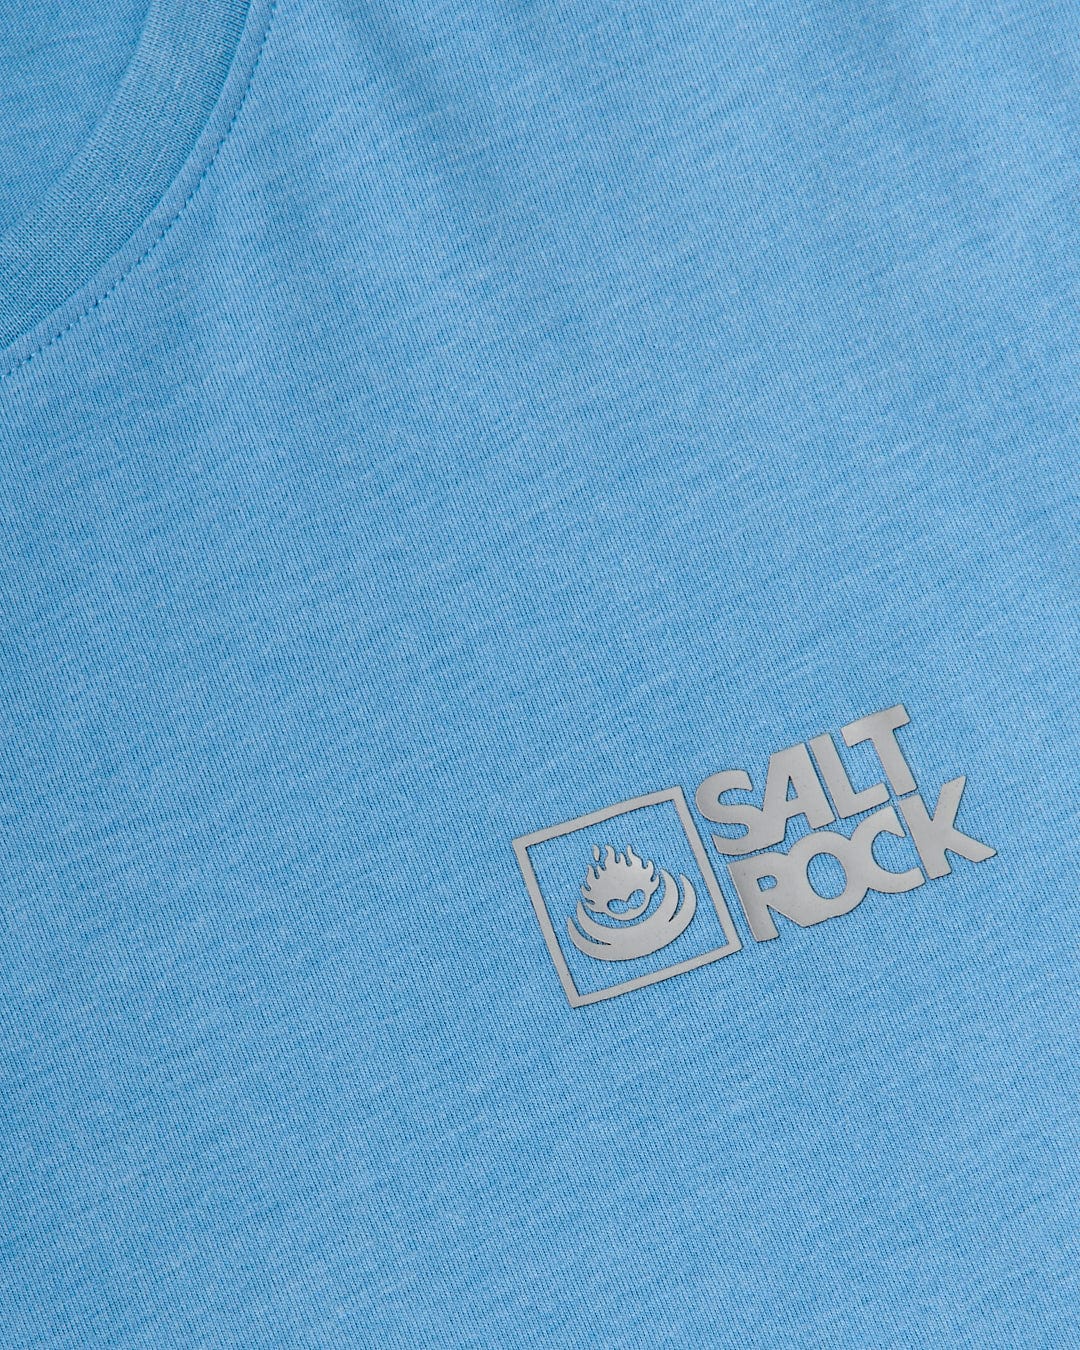 Close-up of a blue lightweight material texture with a Saltrock Original - Mens Short Sleeve T-Shirt - Light Blue logo embroidered in white on the left side.